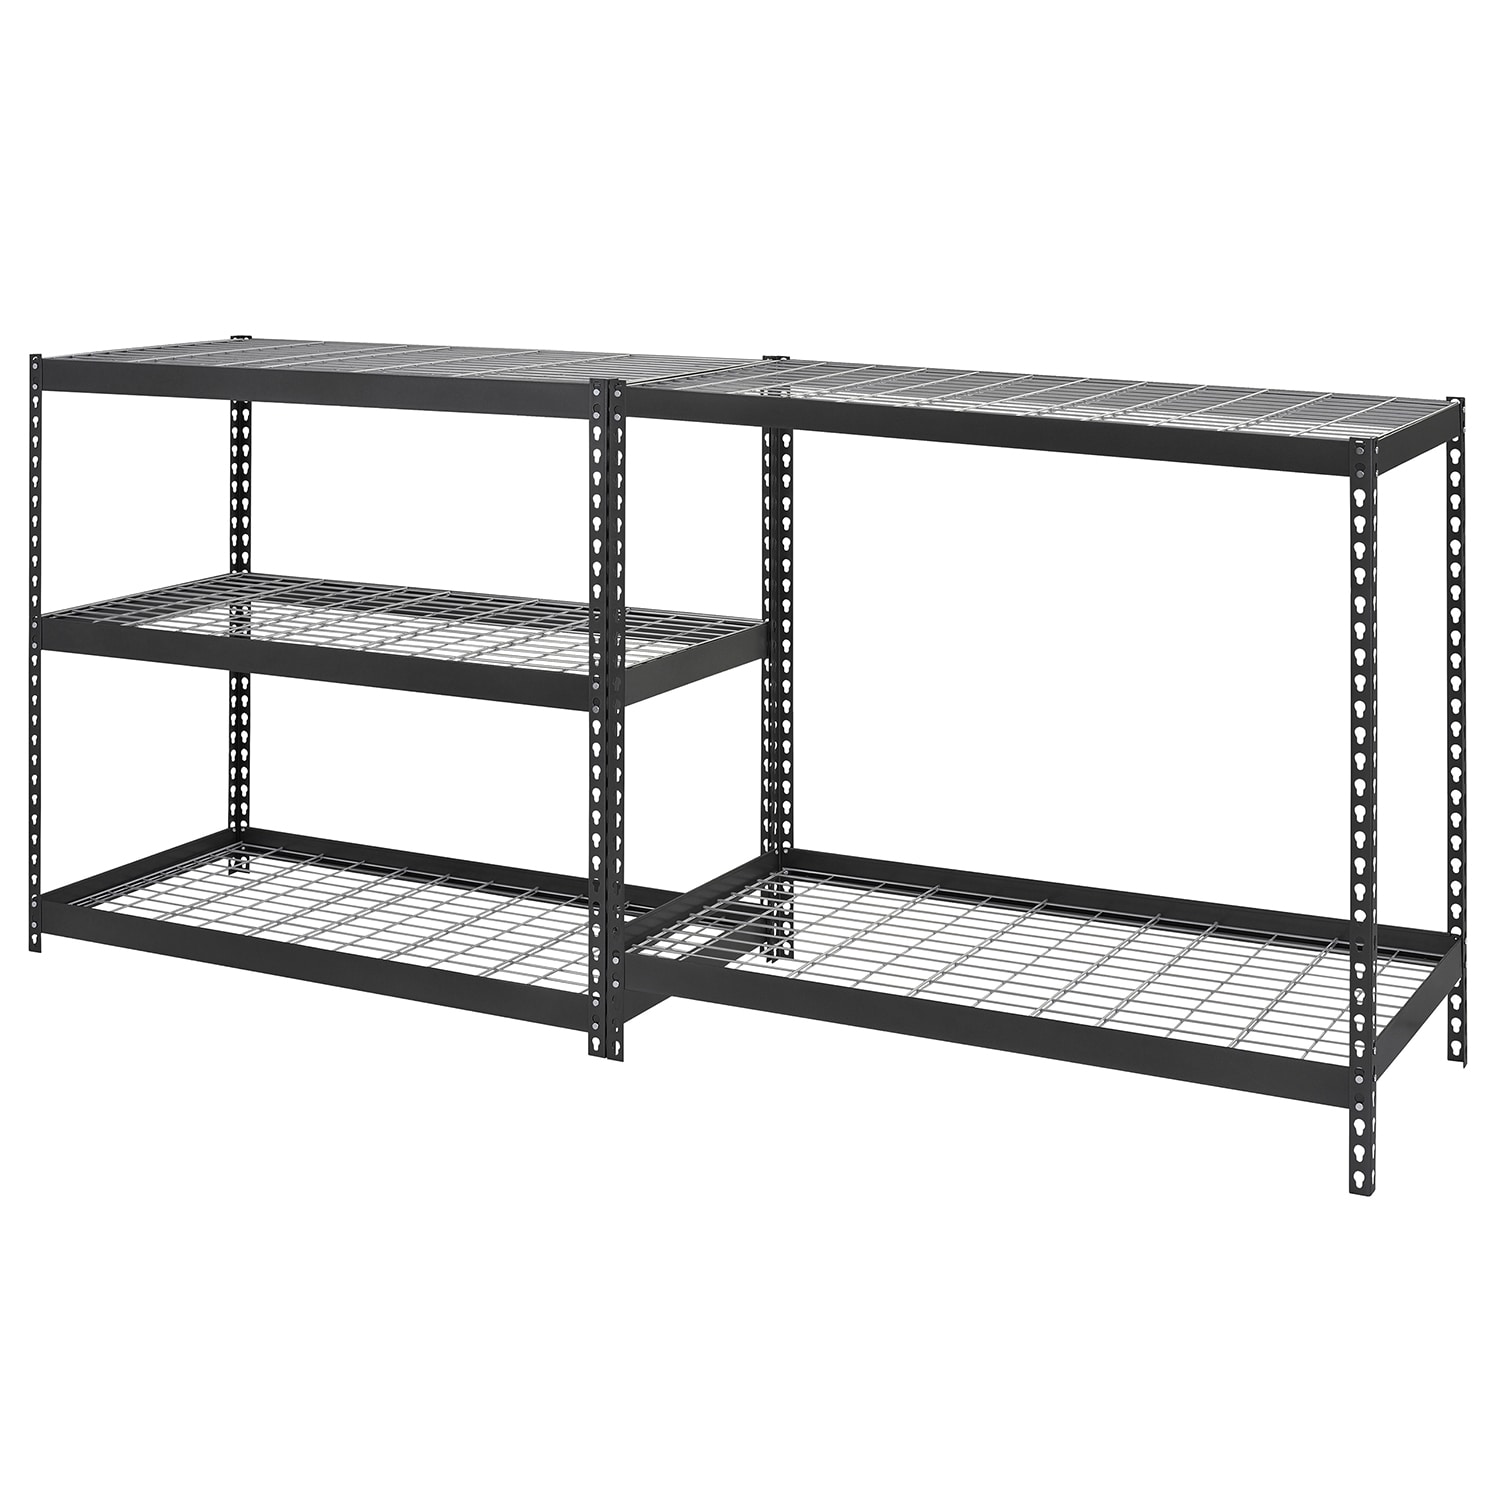 Lyon 36W x 24D x 85H 2000 Series Closed Steel Shelving with Angle Posts - 5 Heavy-Duty Adjustable Shelves - 800 lbs Shelf Capacity - Add-On Unit